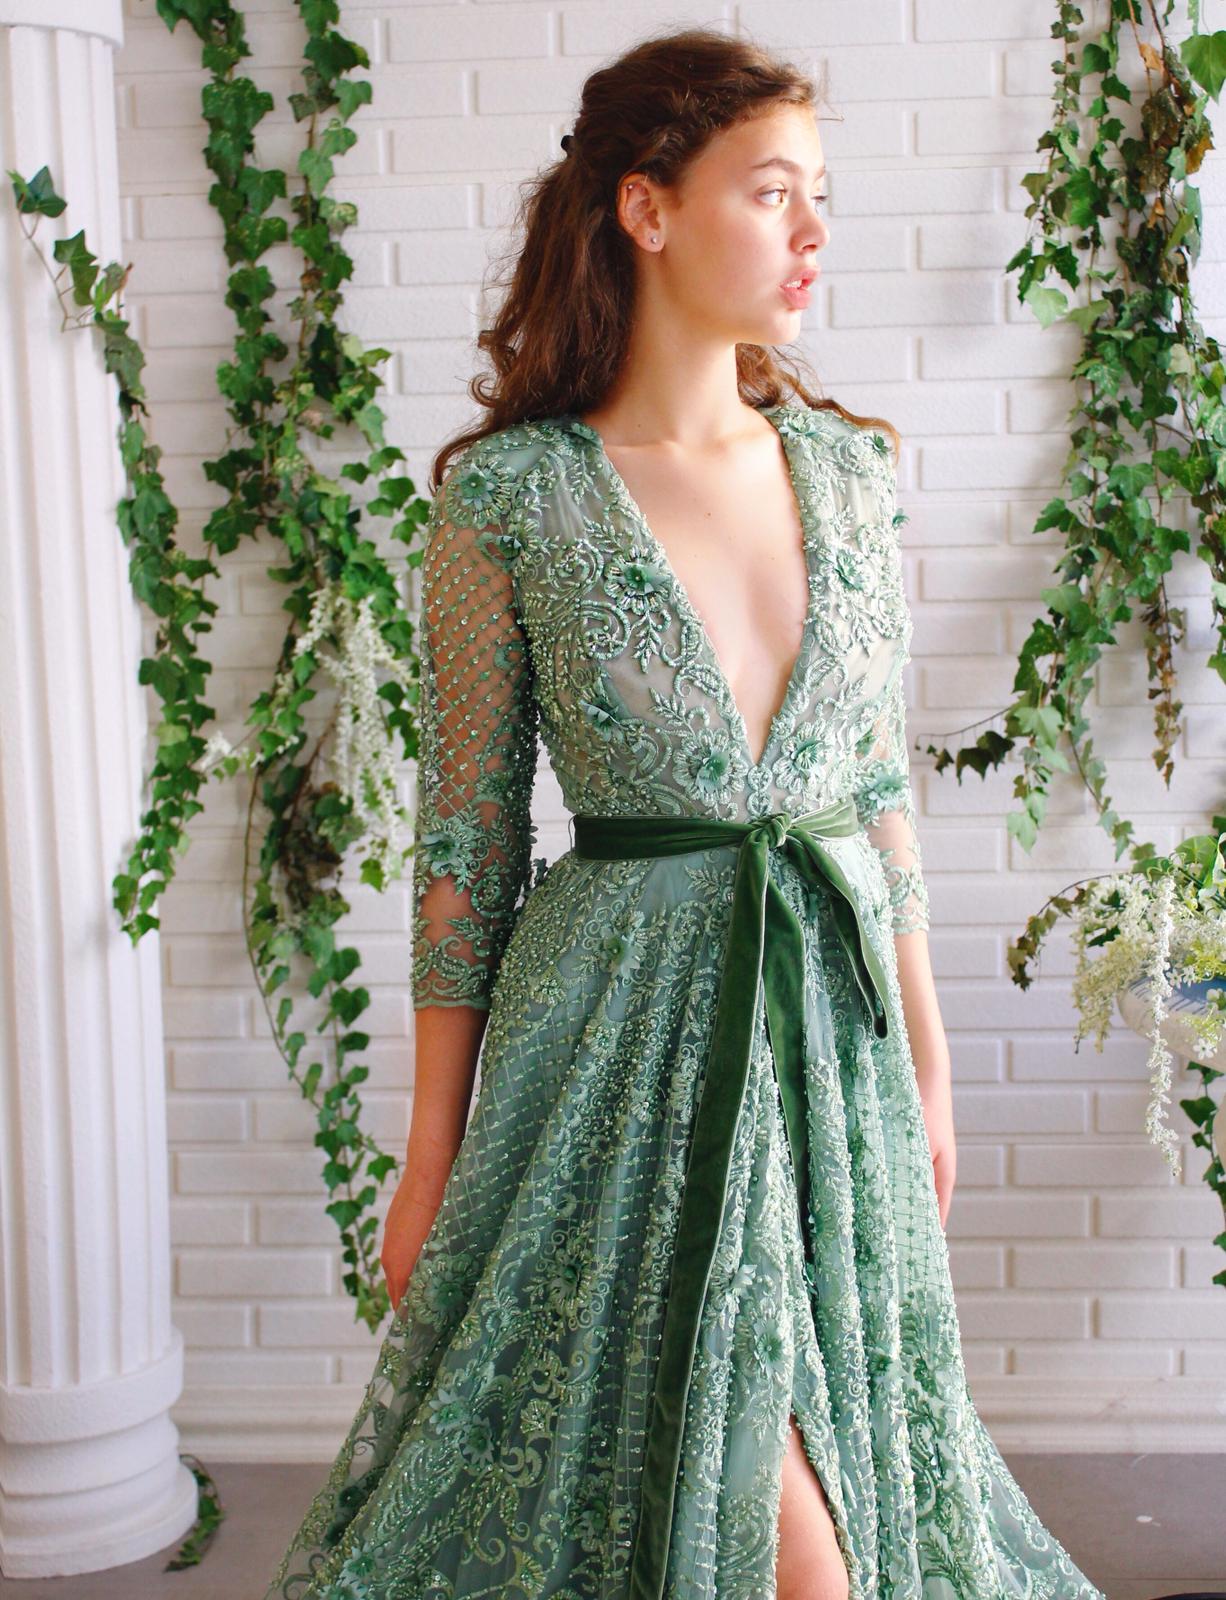 Green A-Line dress with lace, long sleeves and v-neck